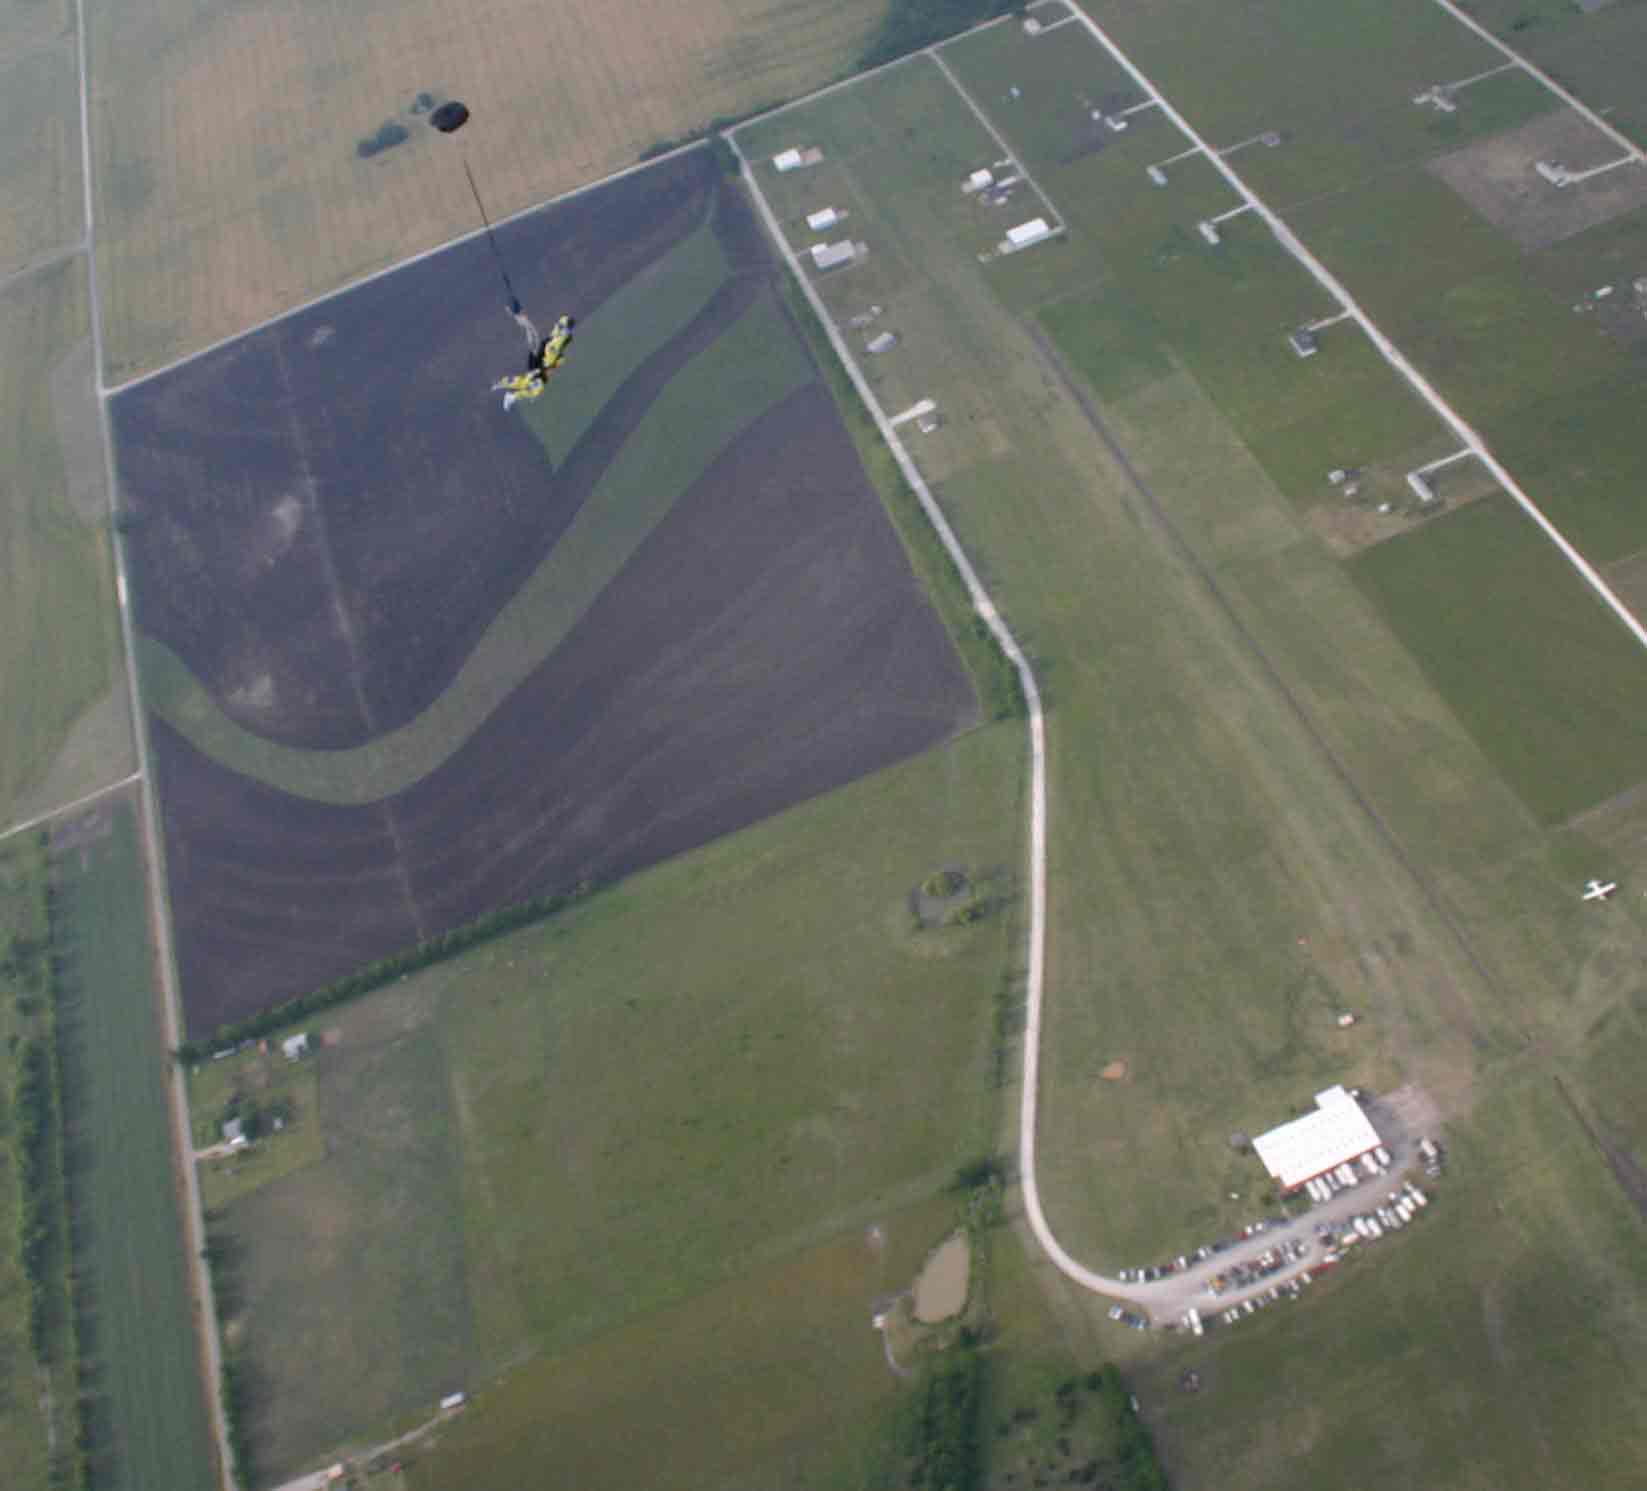  This is Skydive Dallas from the air with me just opening over it.  You land in the hook of the question mark.